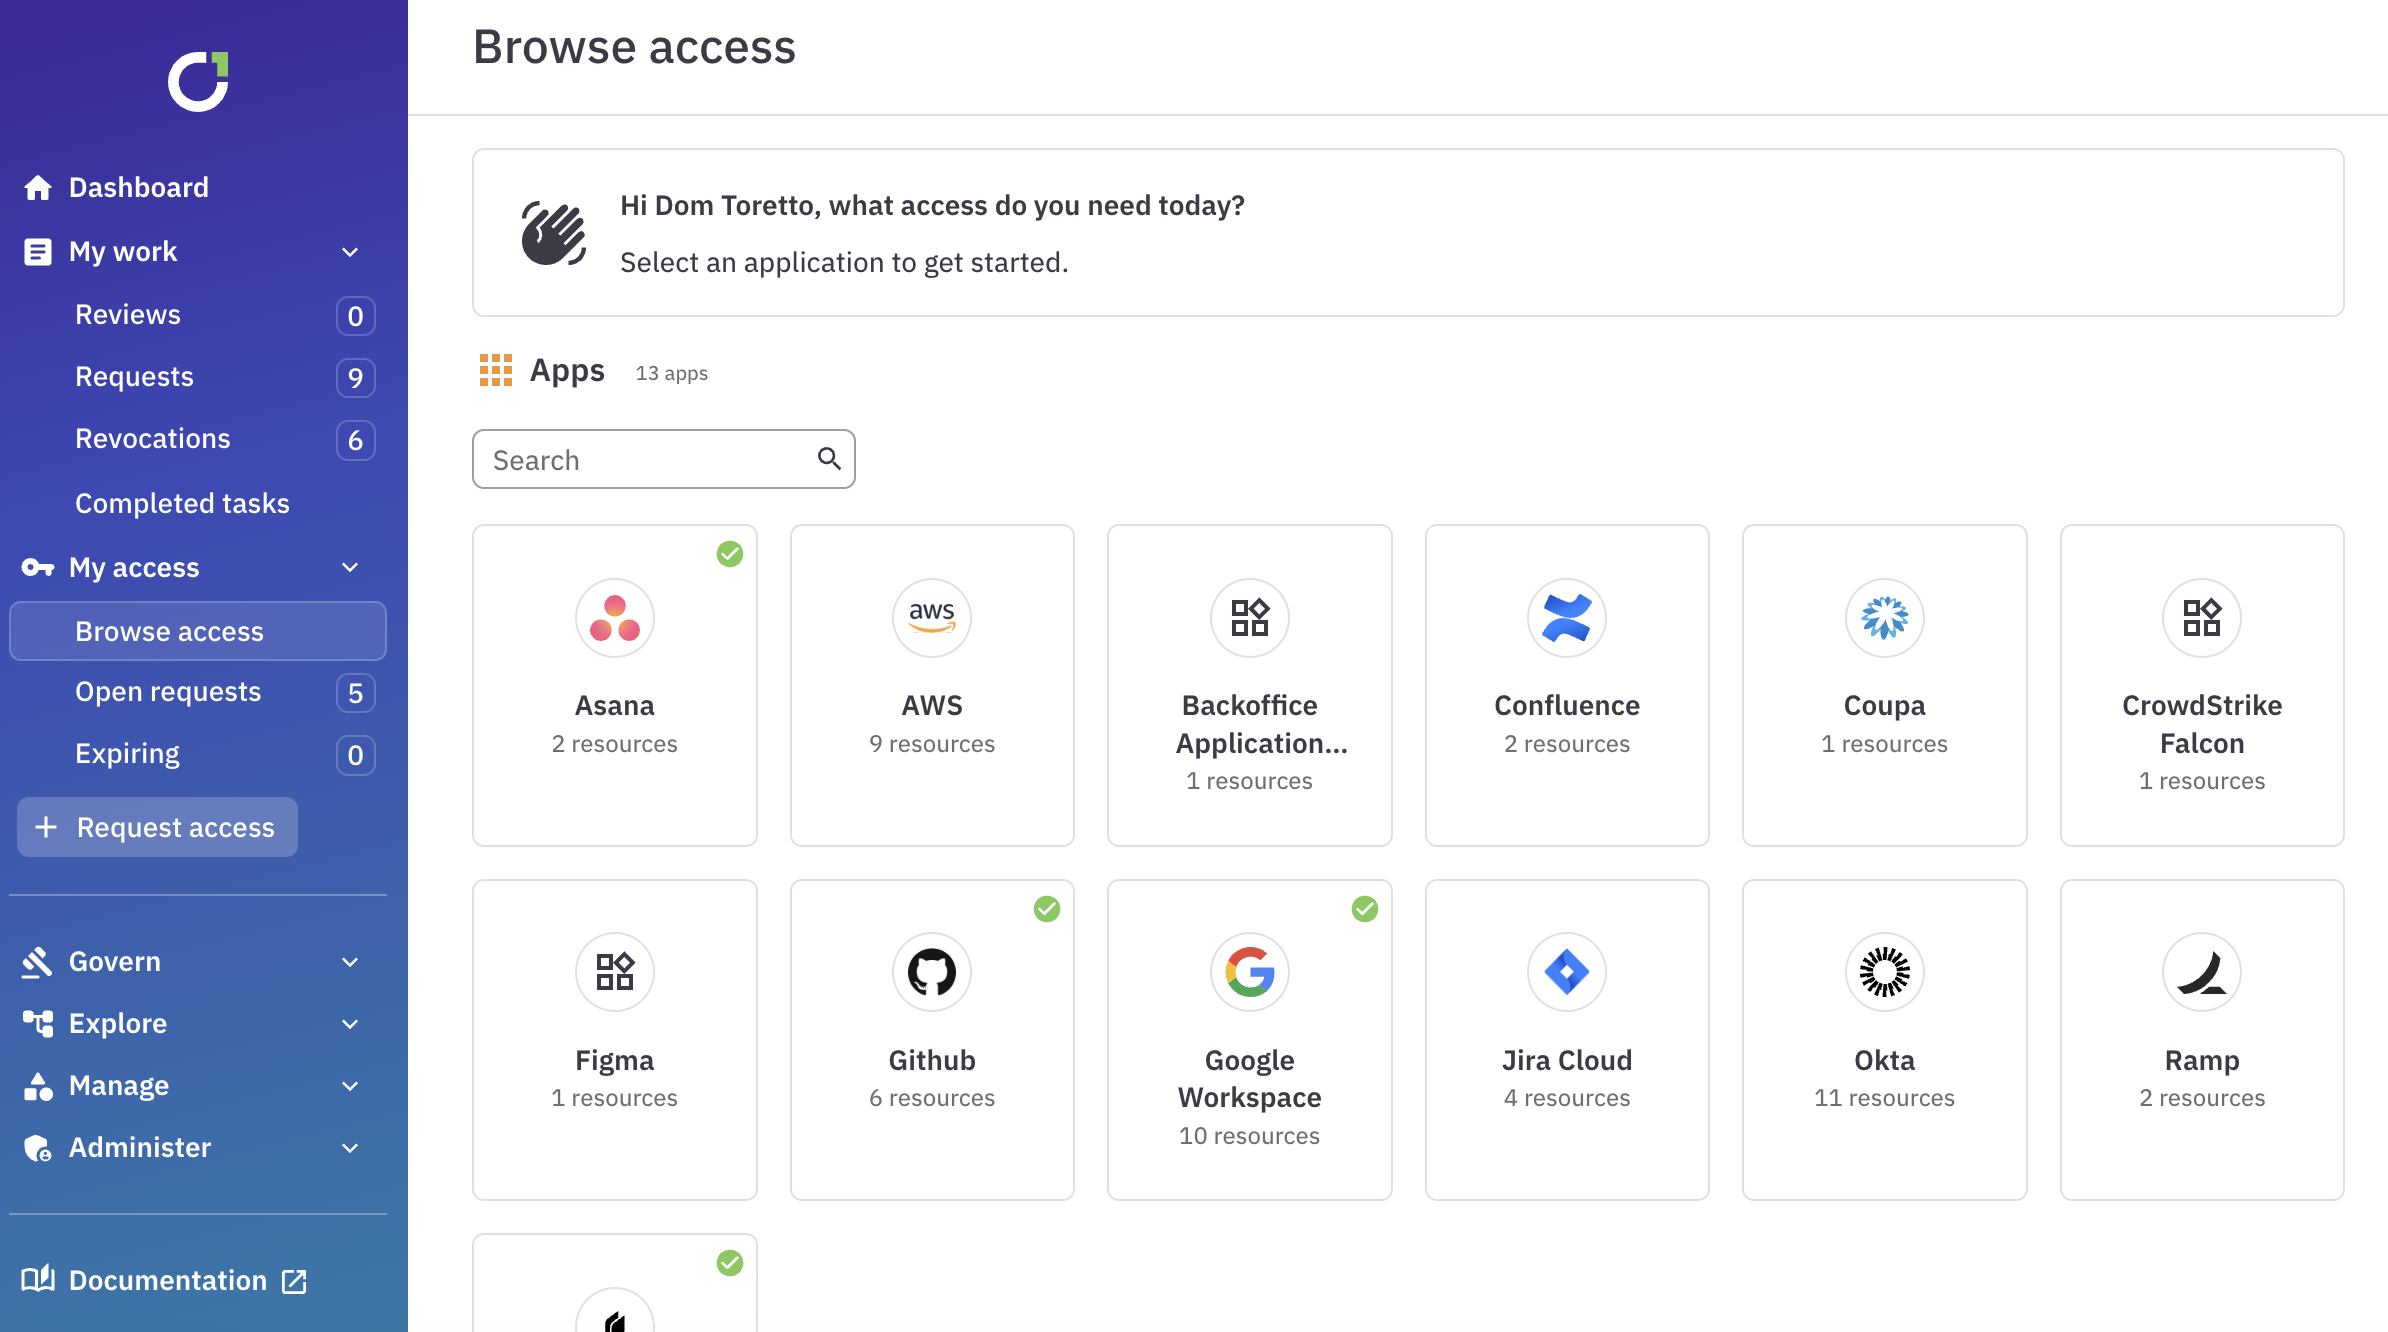 The Browse access page showing 13 available apps.